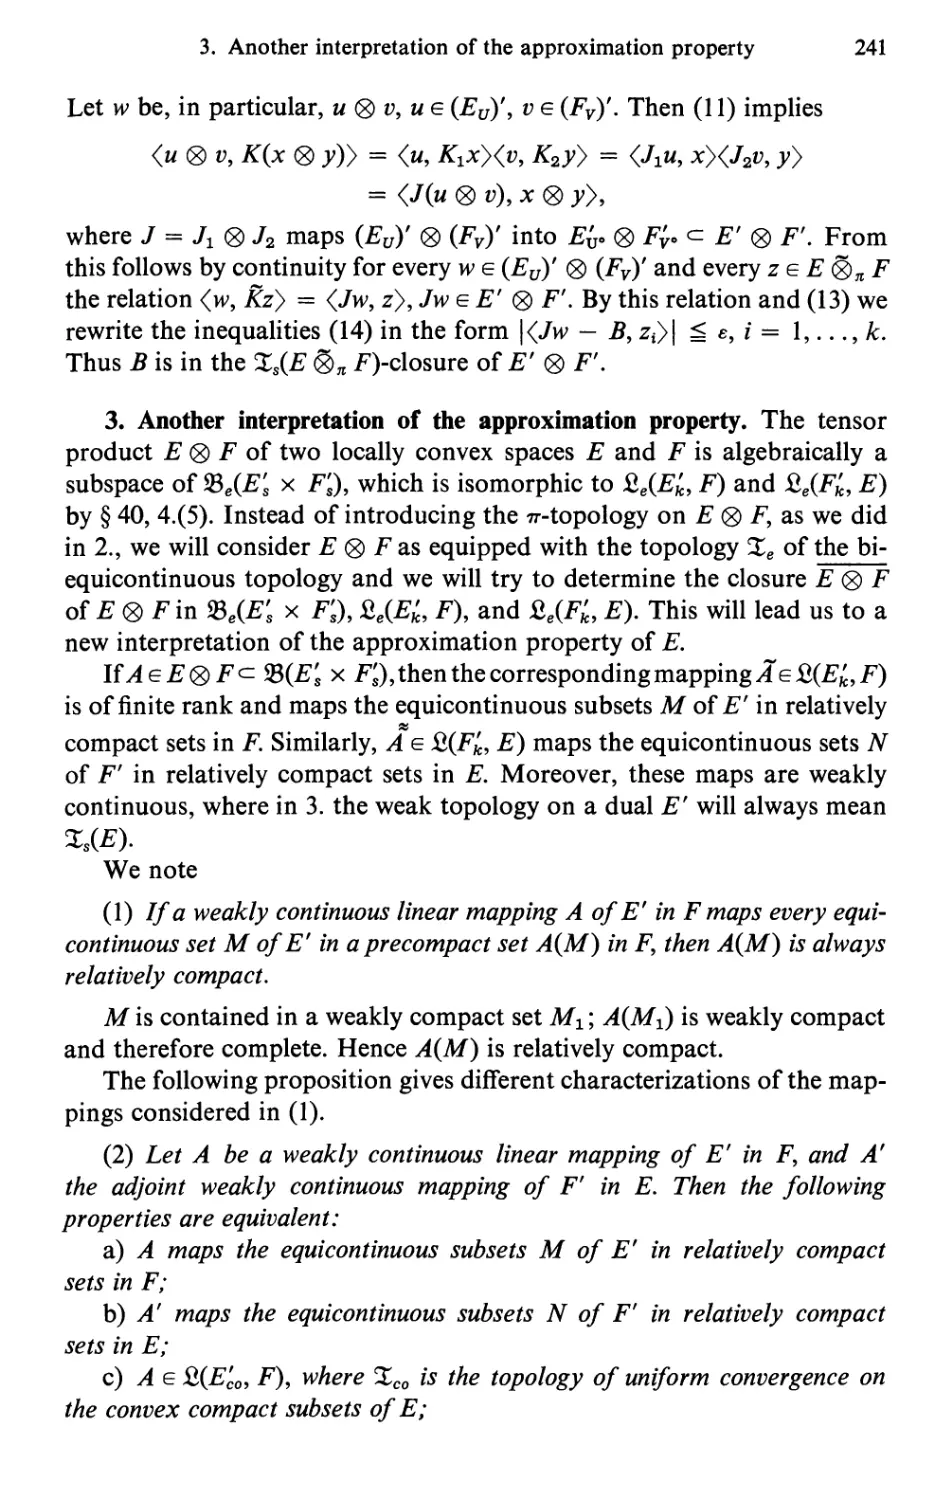 3. Another interpretation of the approximation property